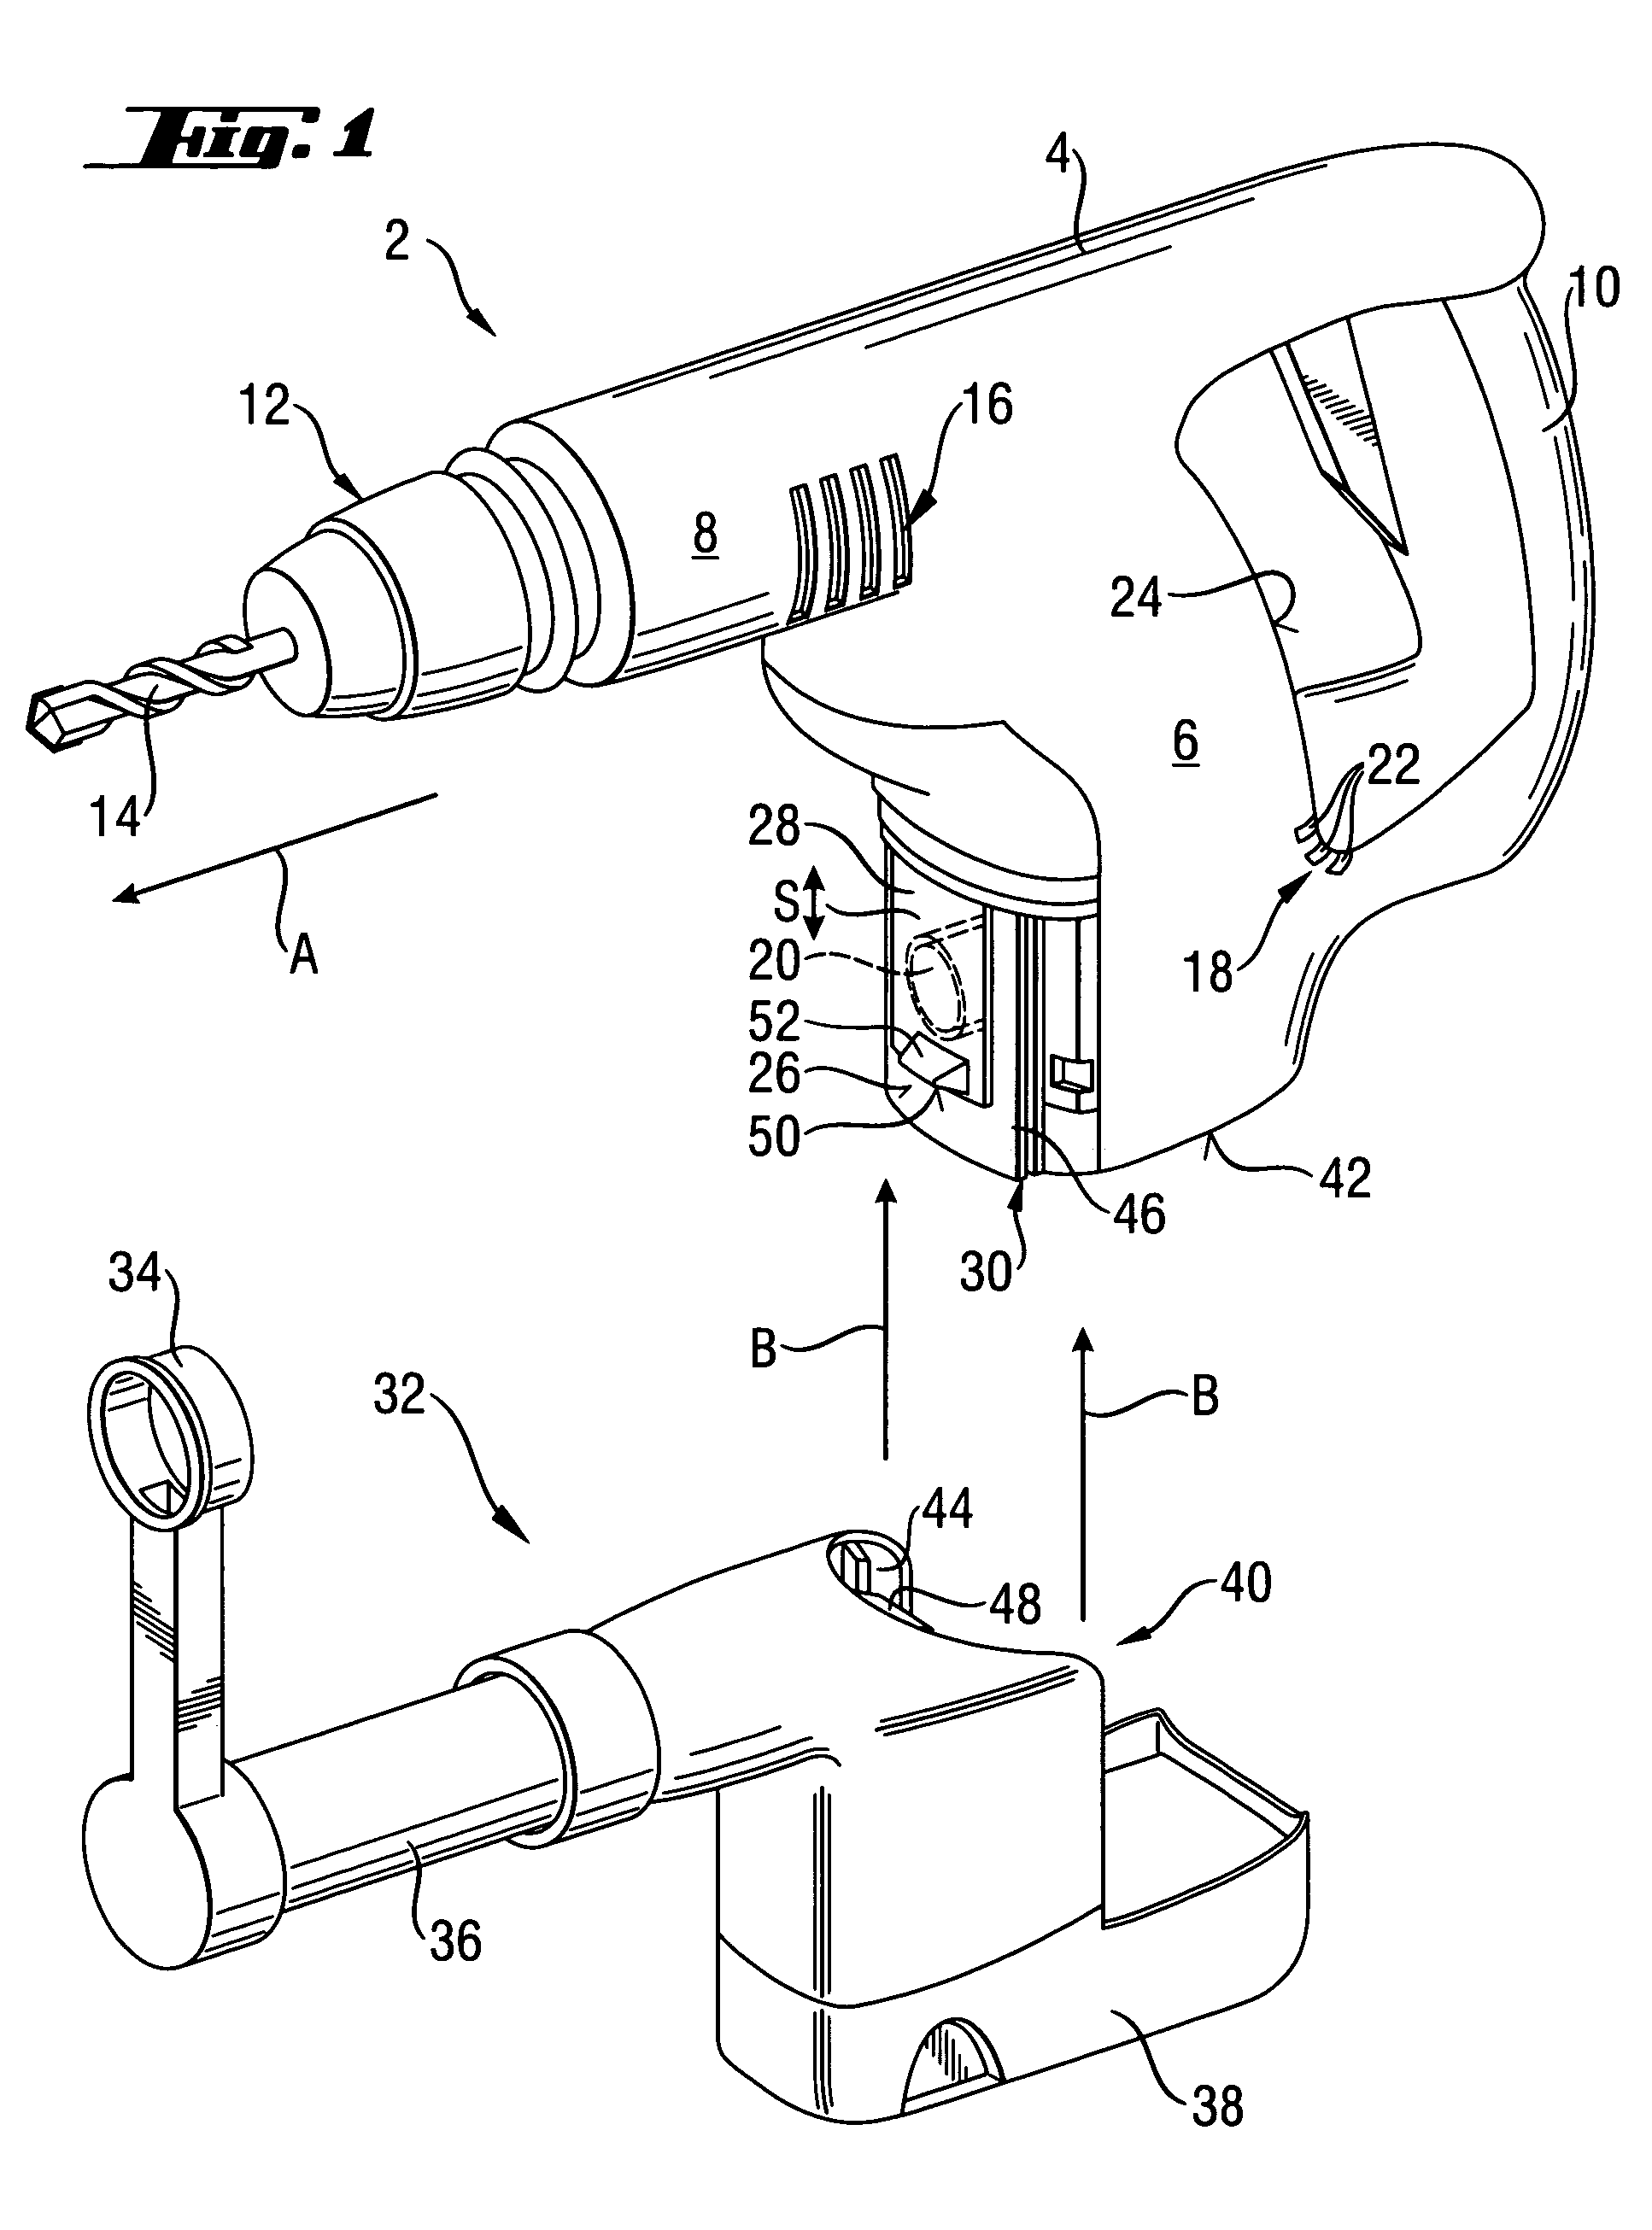 Hand-held power tool with a dust suction module